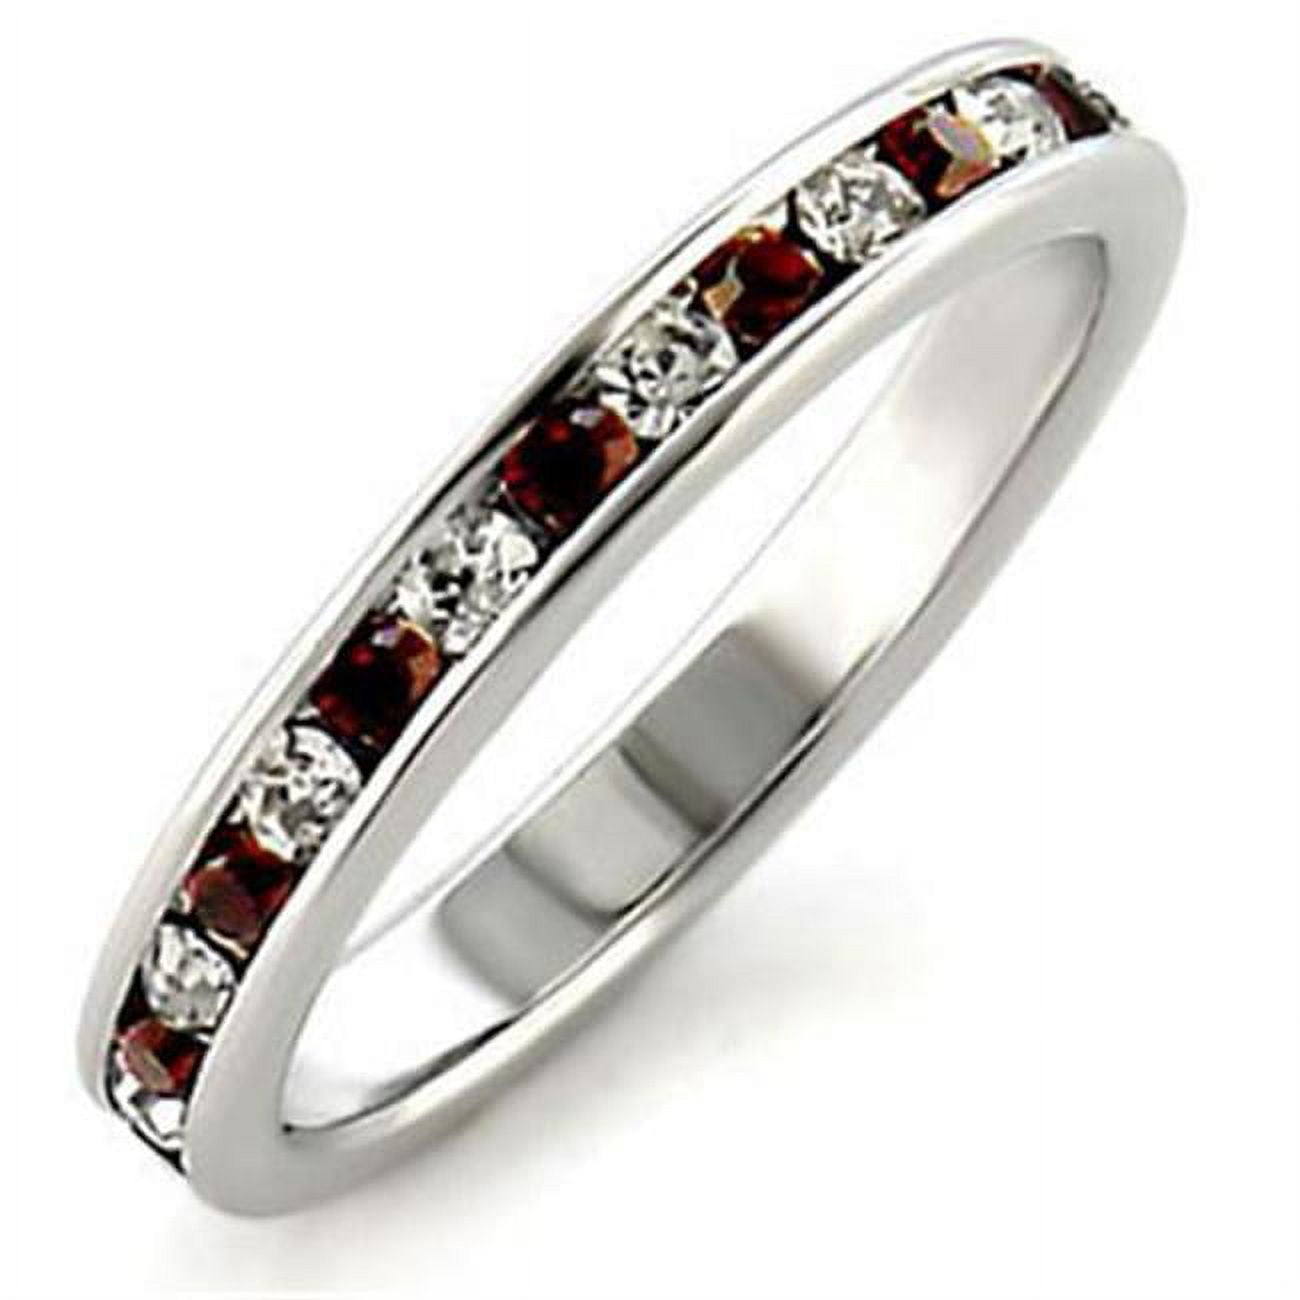 Picture of Alamode LOA508-8 Women High-Polished 925 Sterling Silver Ring with Top Grade Crystal in Garnet - Size 8